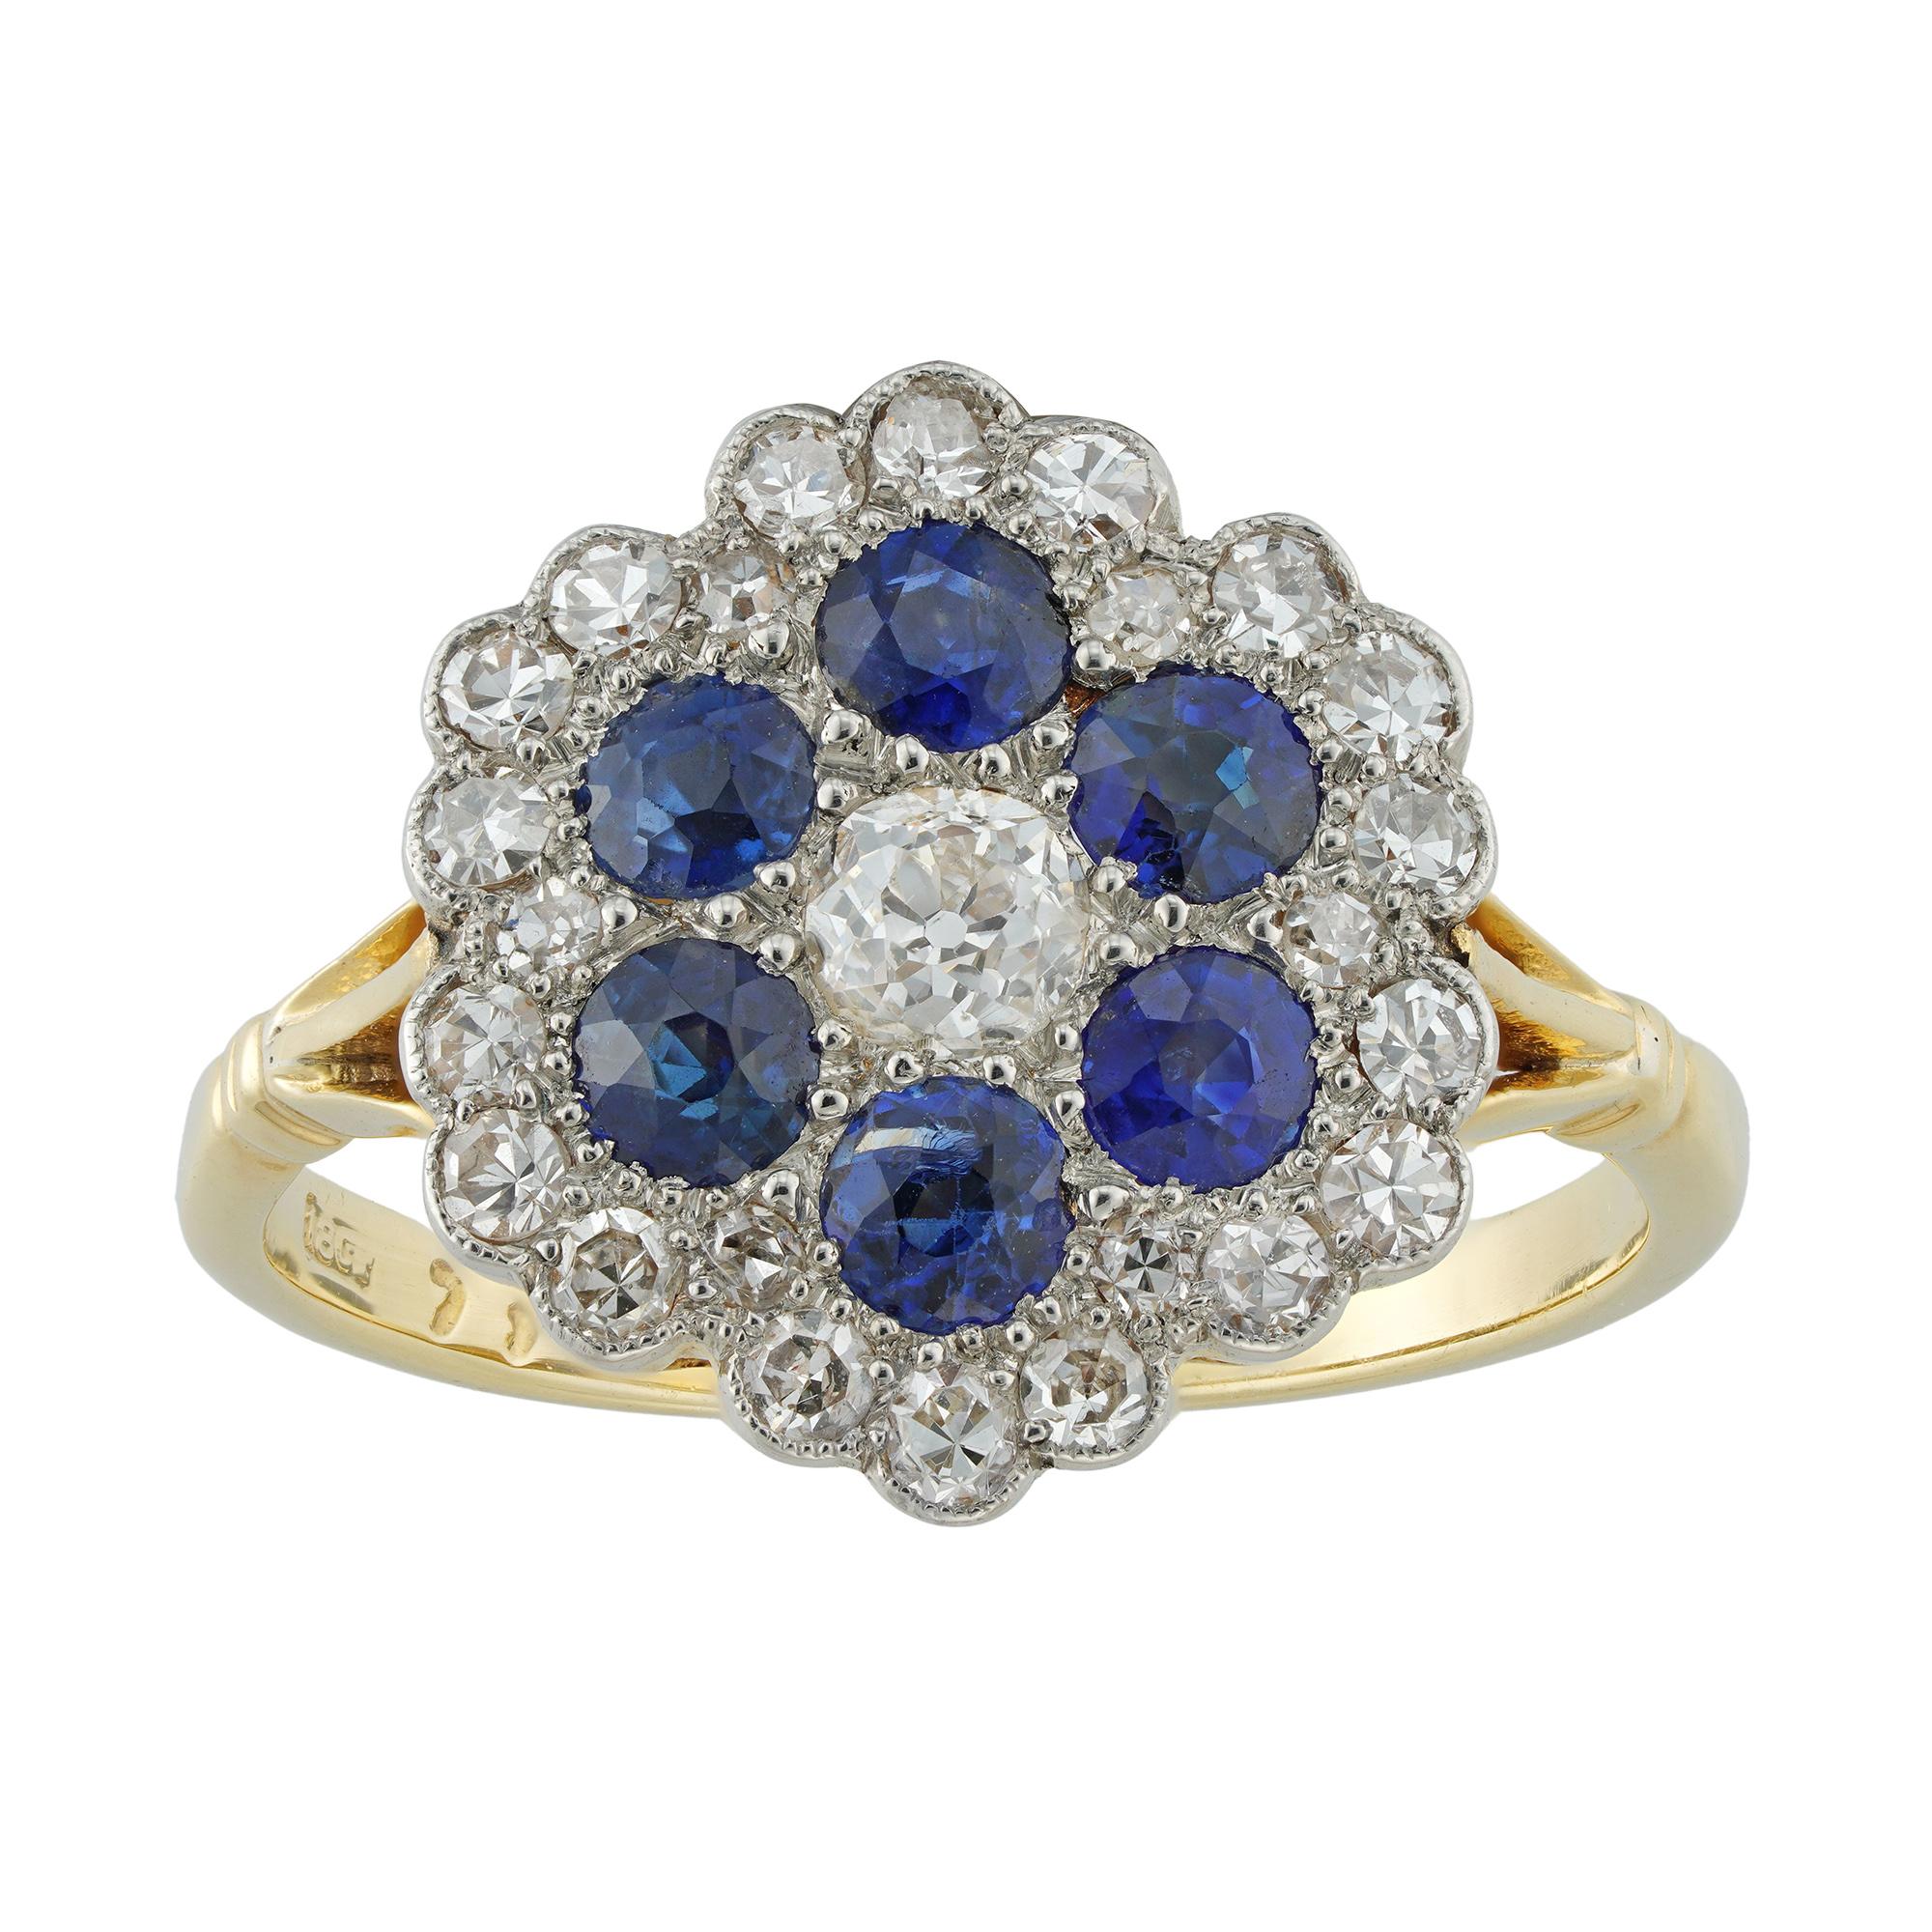 An early 20th century diamond and sapphire cluster ring, the central old European-cut diamond estimated to weigh 0.2 carats, surrounded by six round faceted sapphires estimated to weigh 0.6 carats and embellishes with twenty-four small Swiss-cut